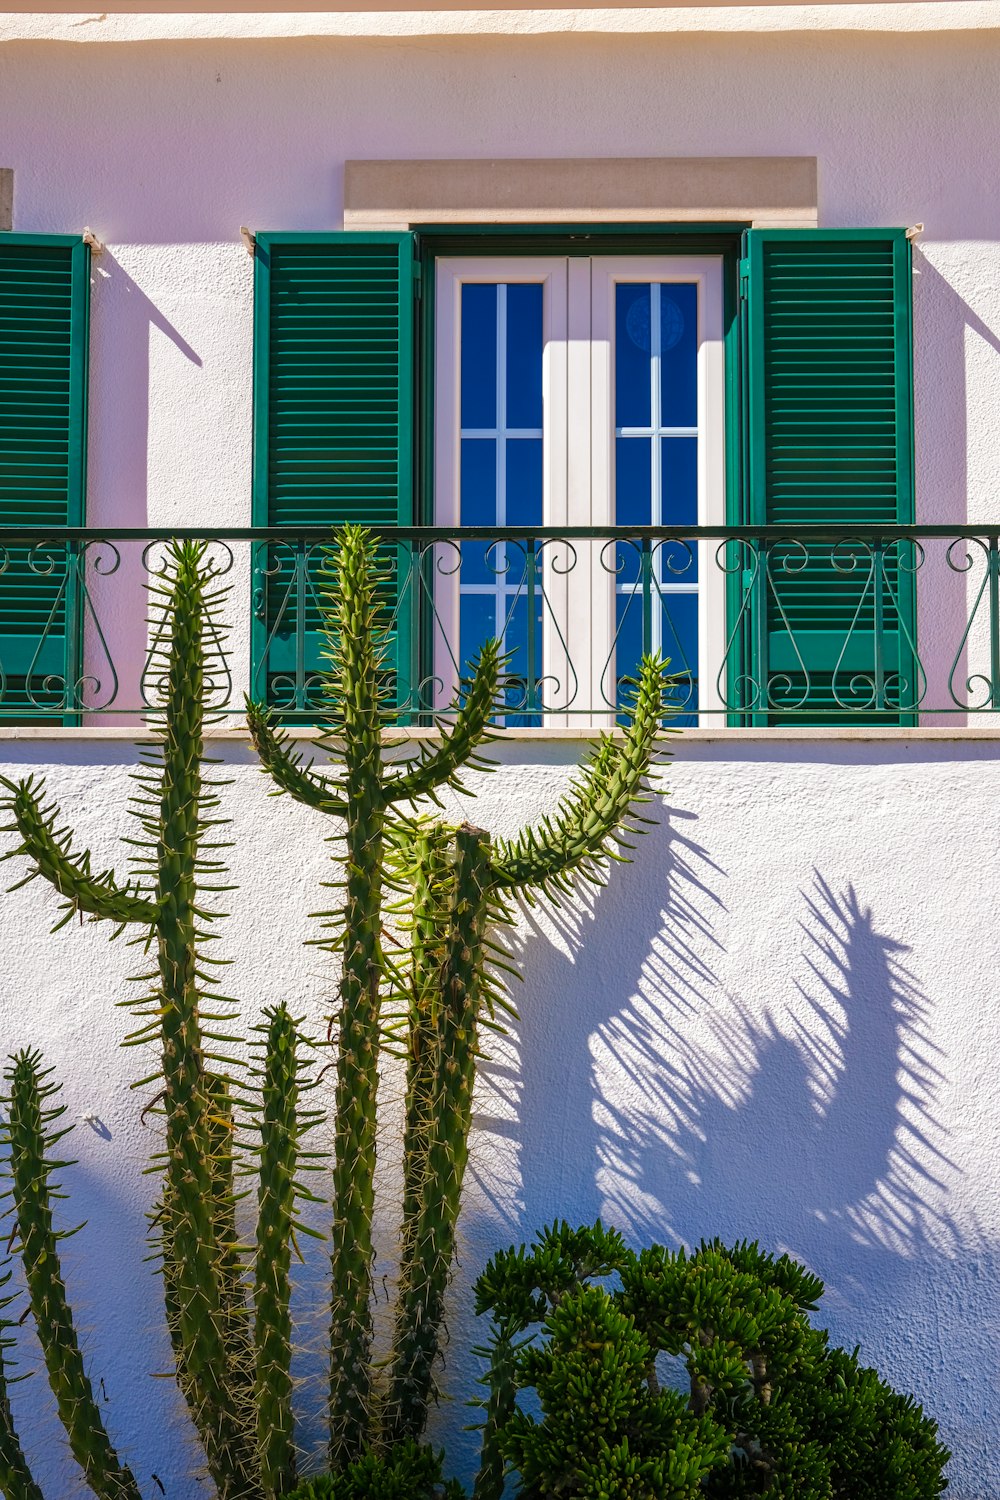 a cactus in front of a white building with green shutters